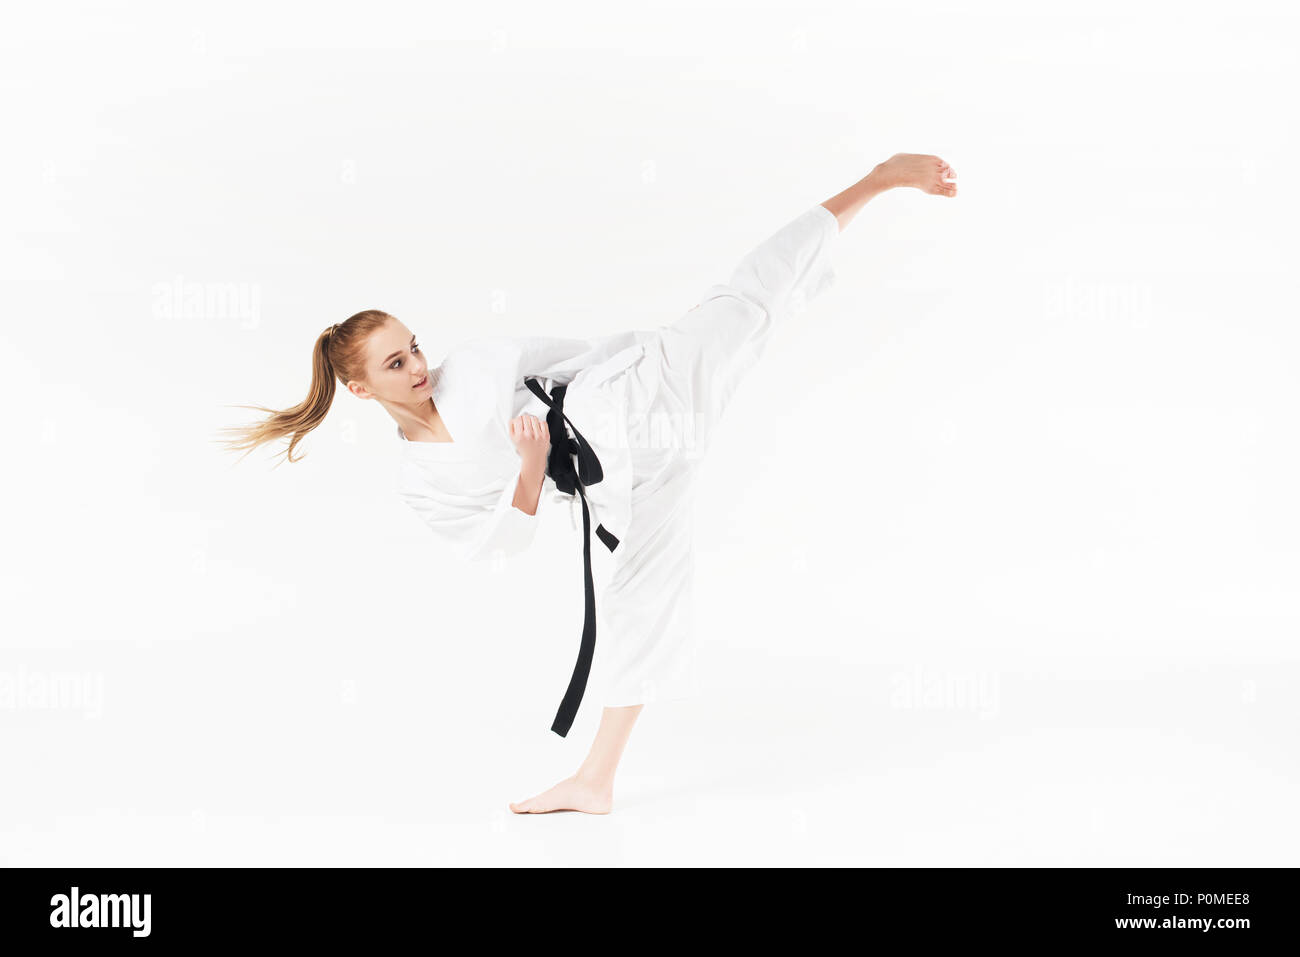 female karate fighter with black belt performing kick isolated on white Stock Photo